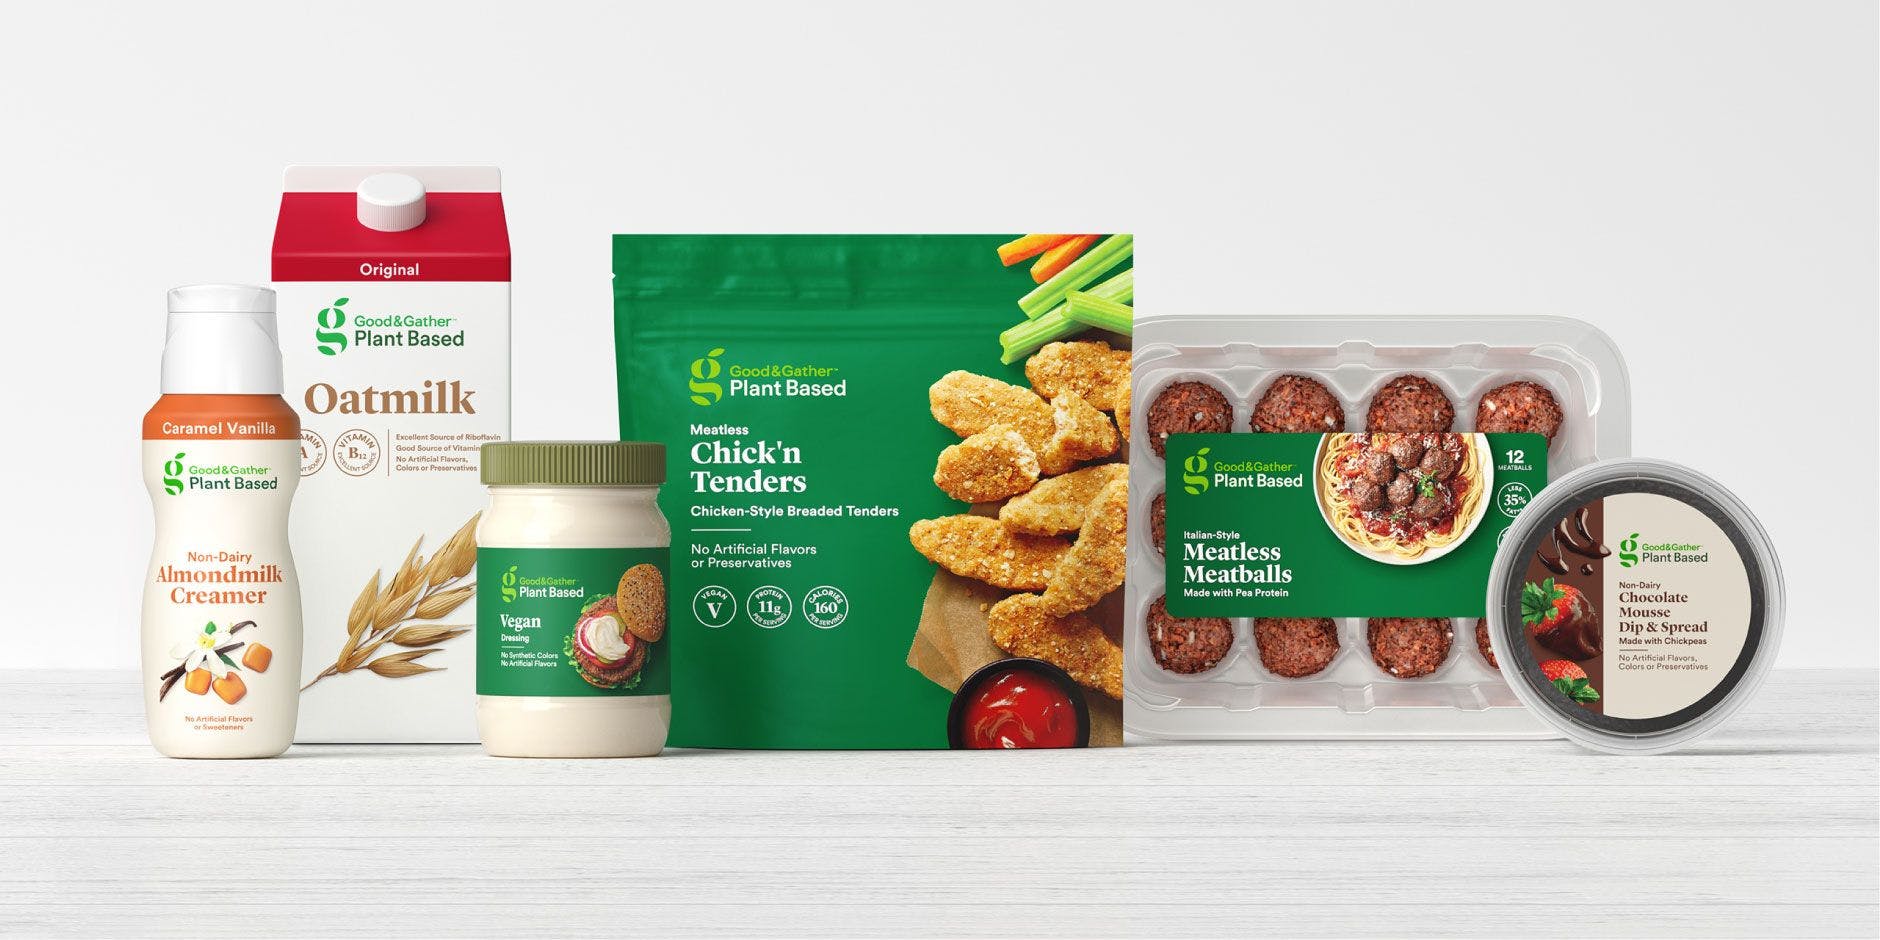 New Target plant-based based private label expansion